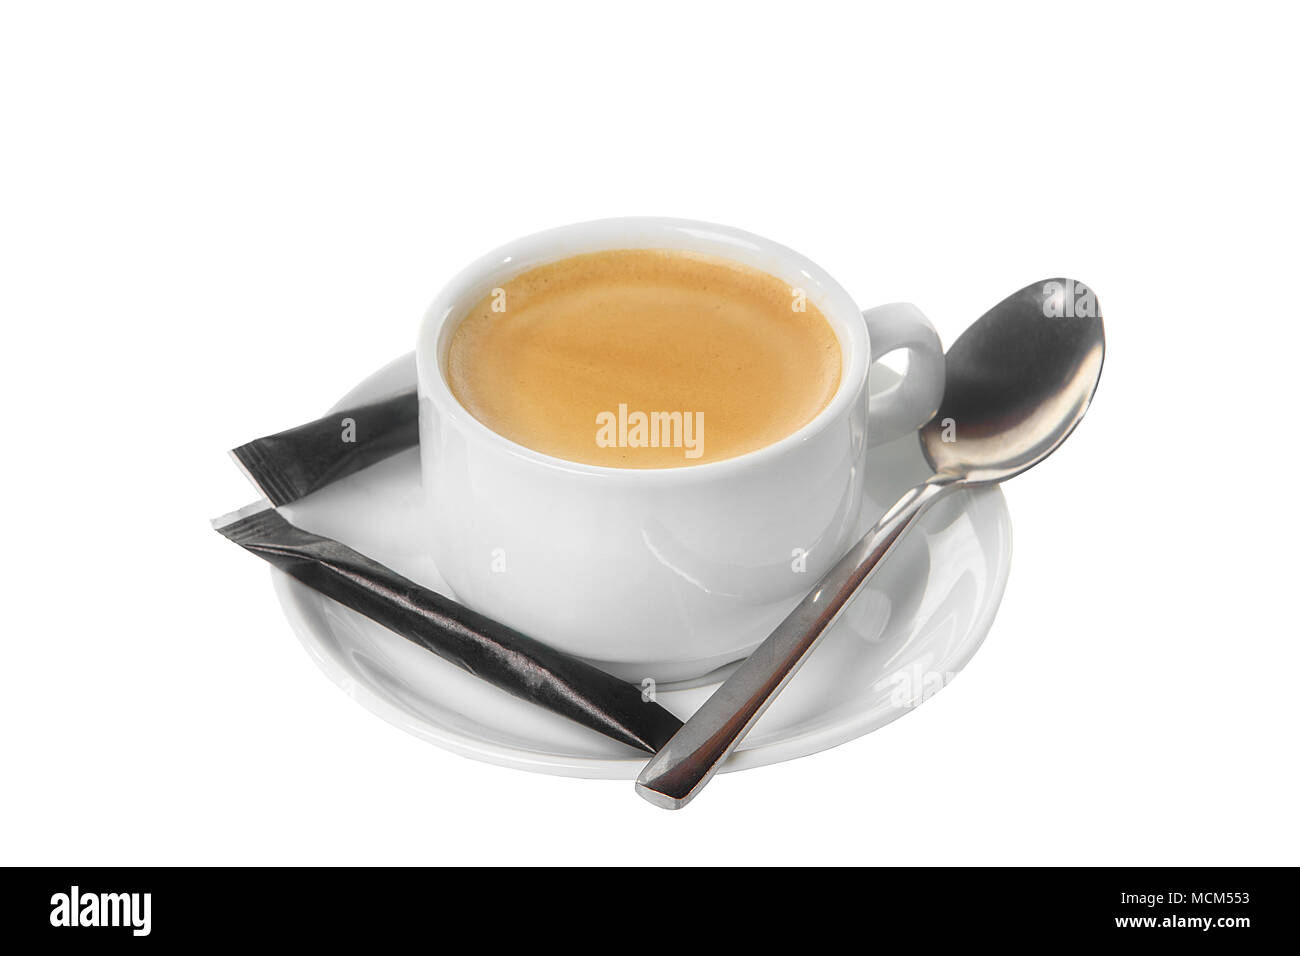 A cup of coffee, American, cappuccino, full of two black bags, a dose of sugar, a teaspoon. For the technological map. Side view from above Isolated w Stock Photo